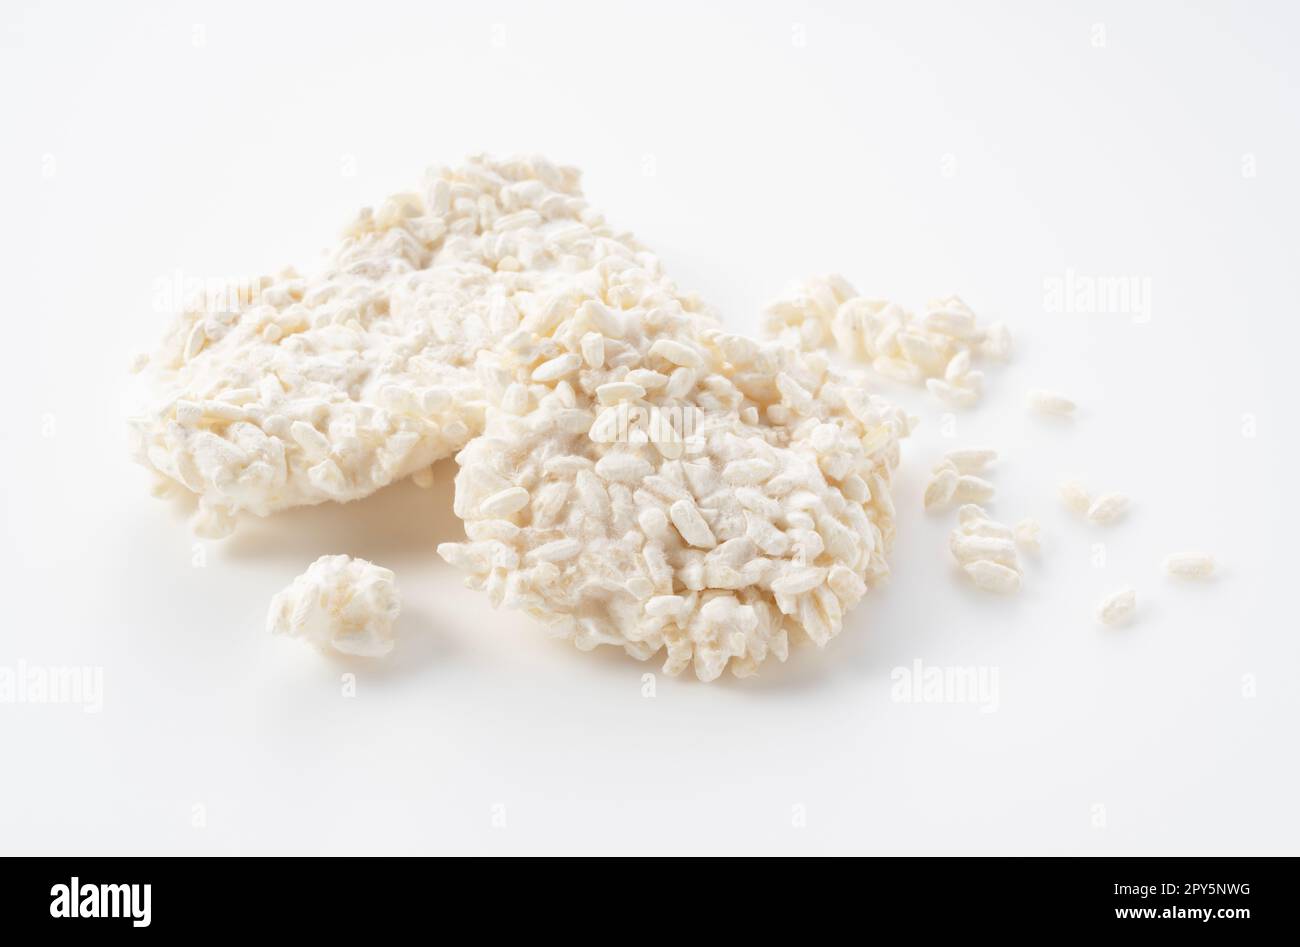 Rice malt placed against a white background. Koji mold. Stock Photo